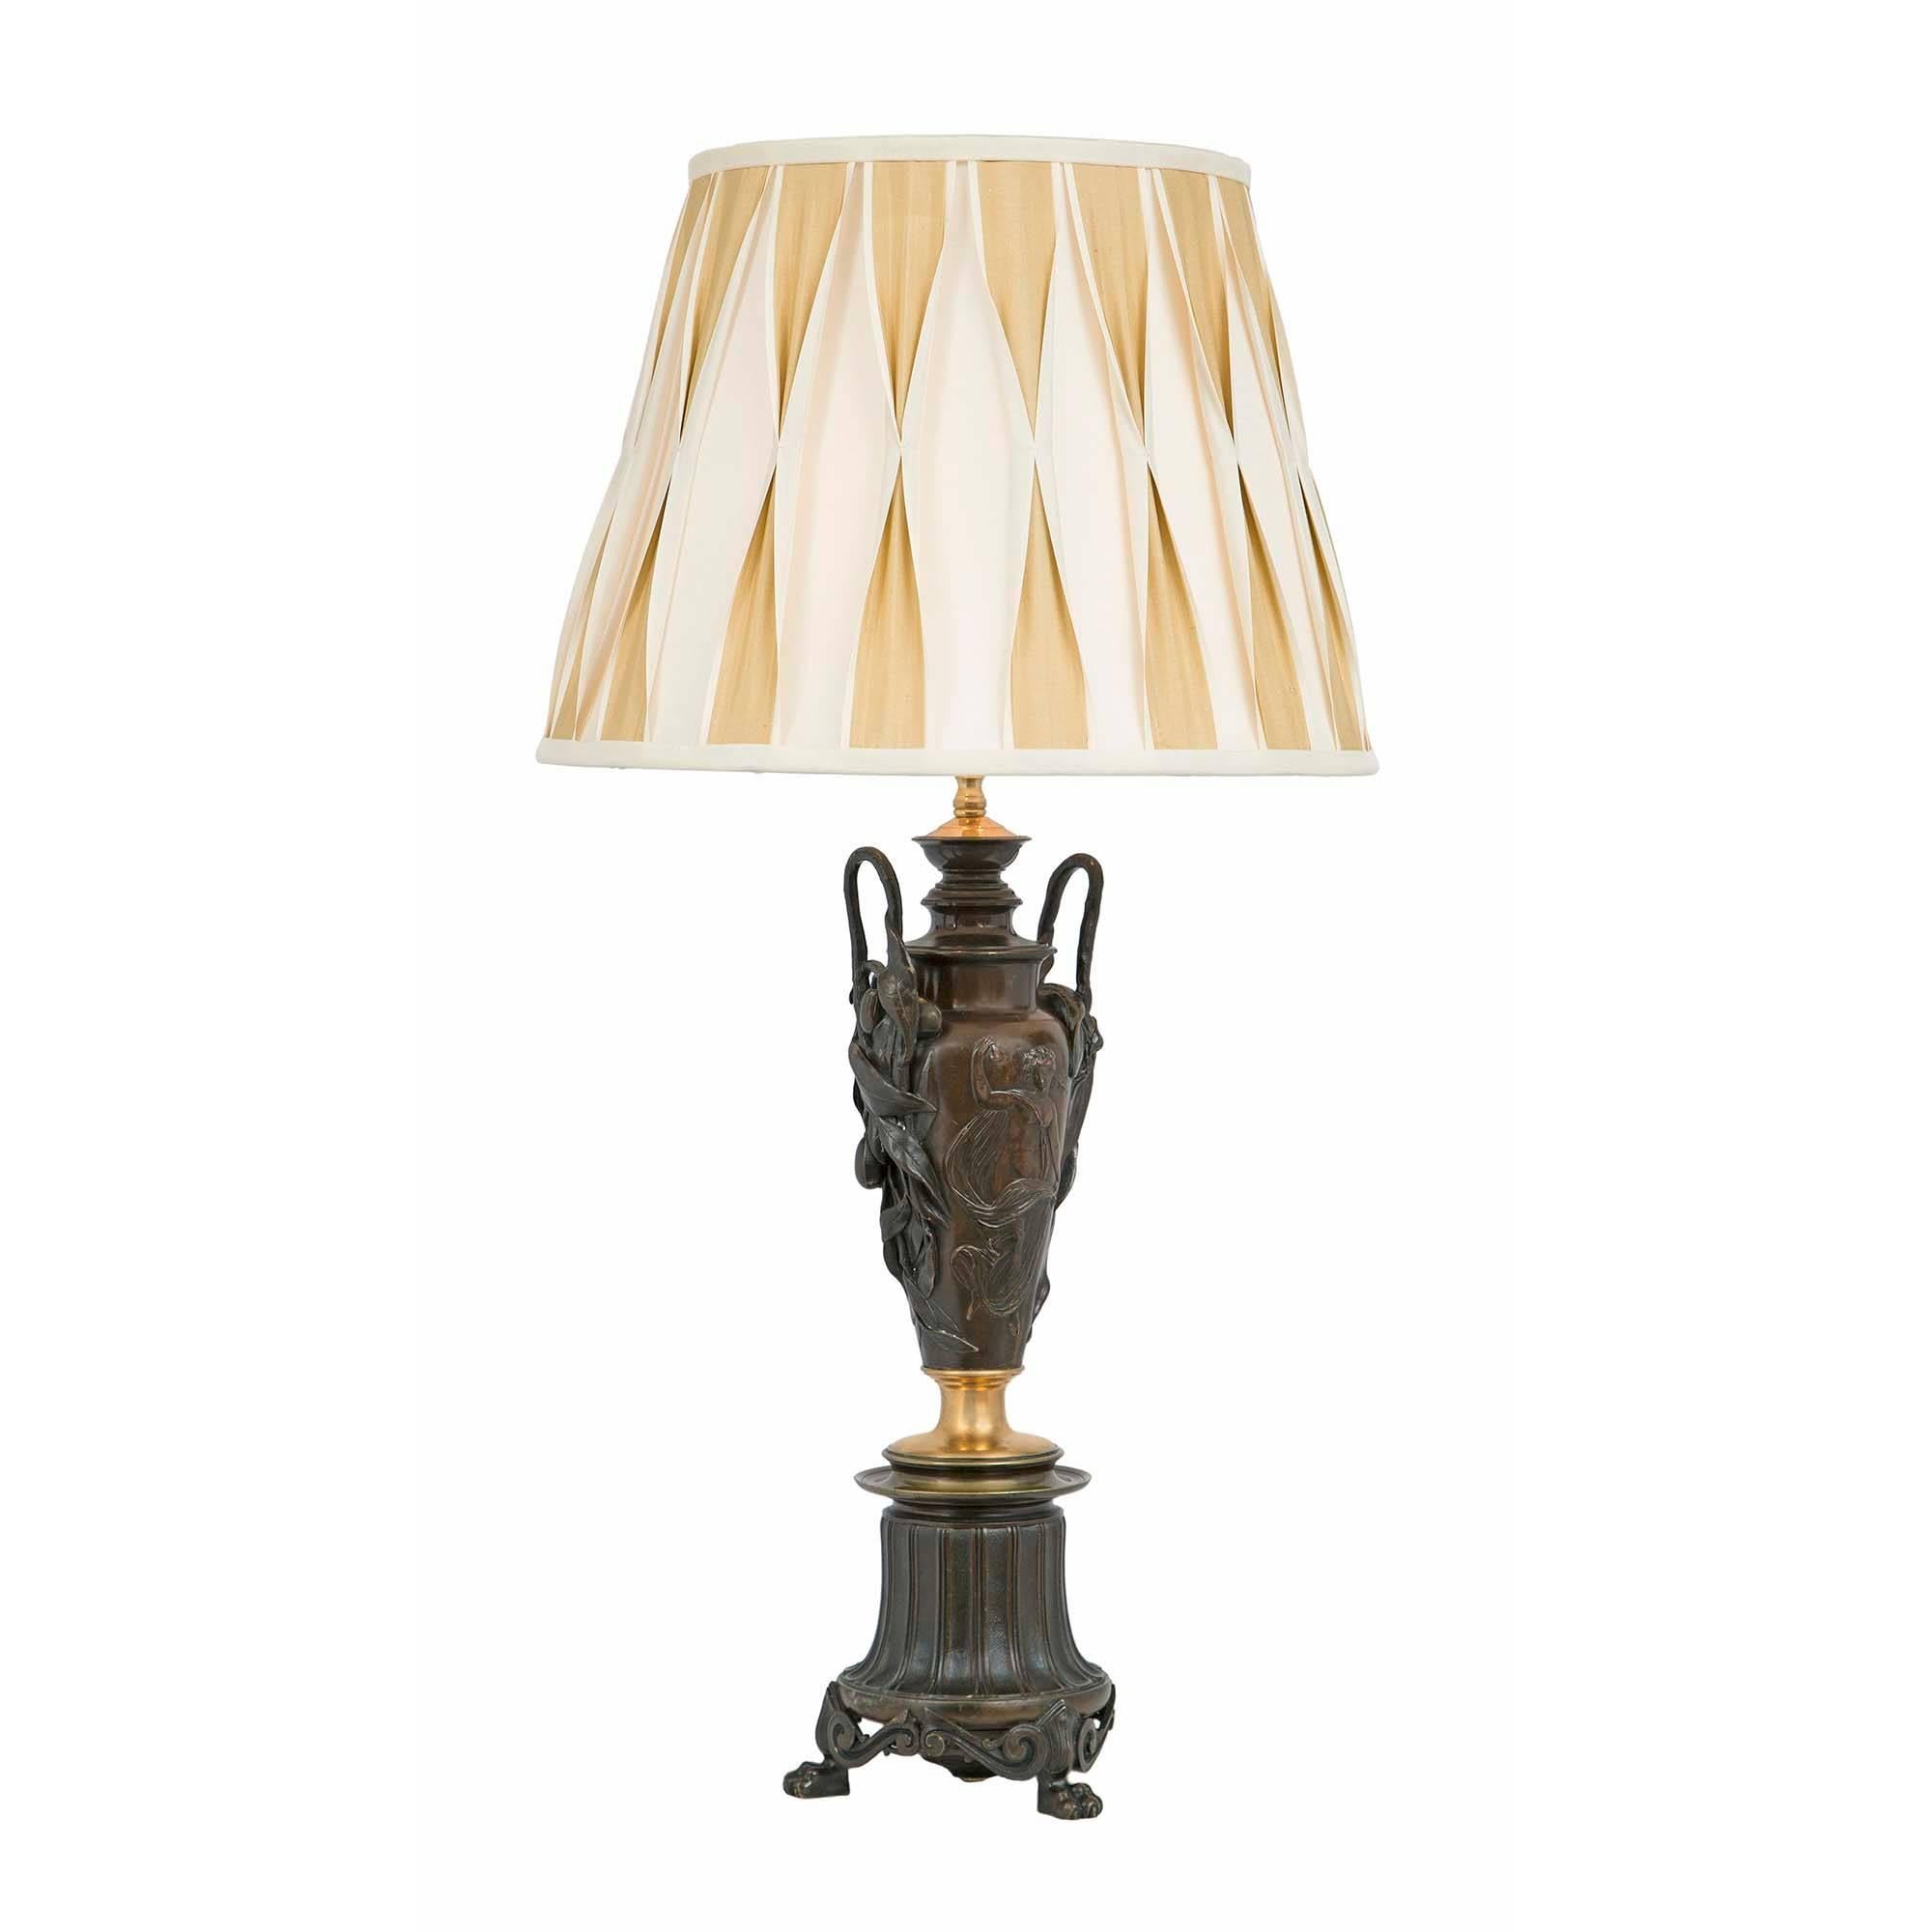 A stunning true pair of French 19th century Neo-Classical st. patinated bronze and ormolu lamps. Each lamp is raised by handsome paw feet below a circular mottled base and ormolu band. The fluted bronze center pedestals are decorated with olive